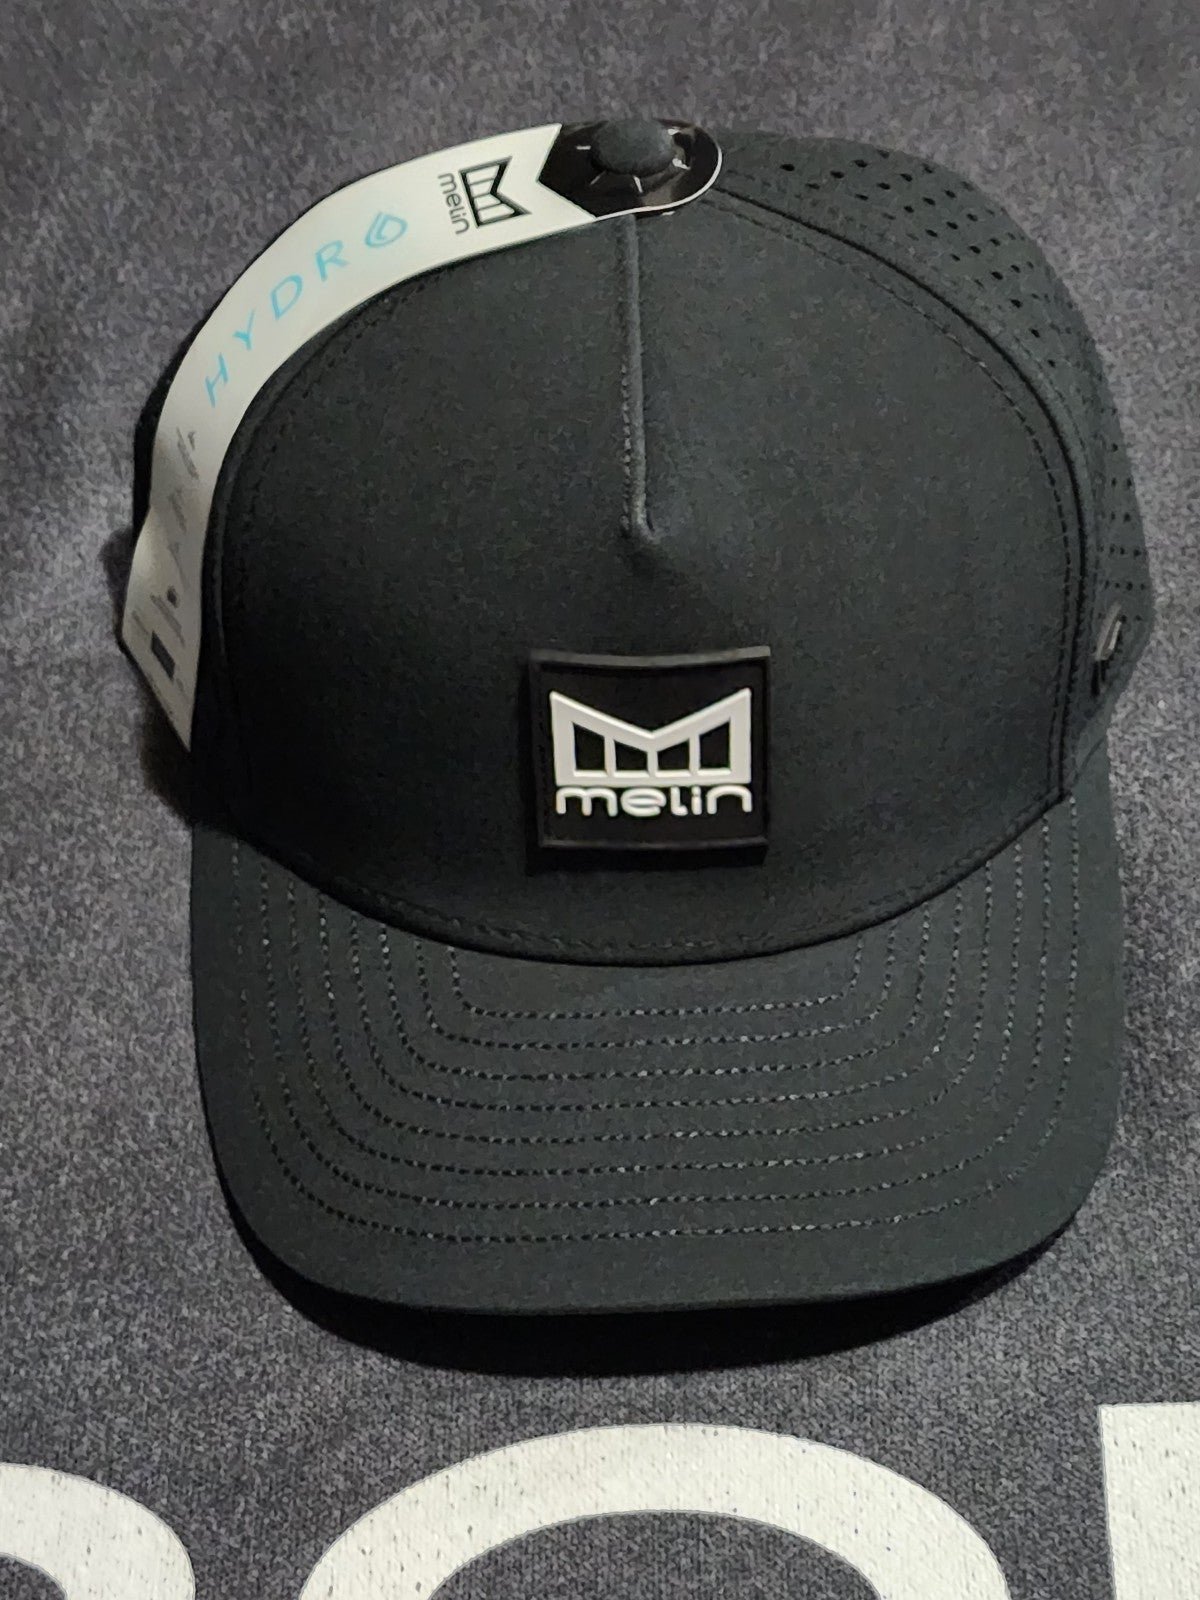 Melin Hydro Odyssey Stacked Black Classic Fit Hat Cziuf